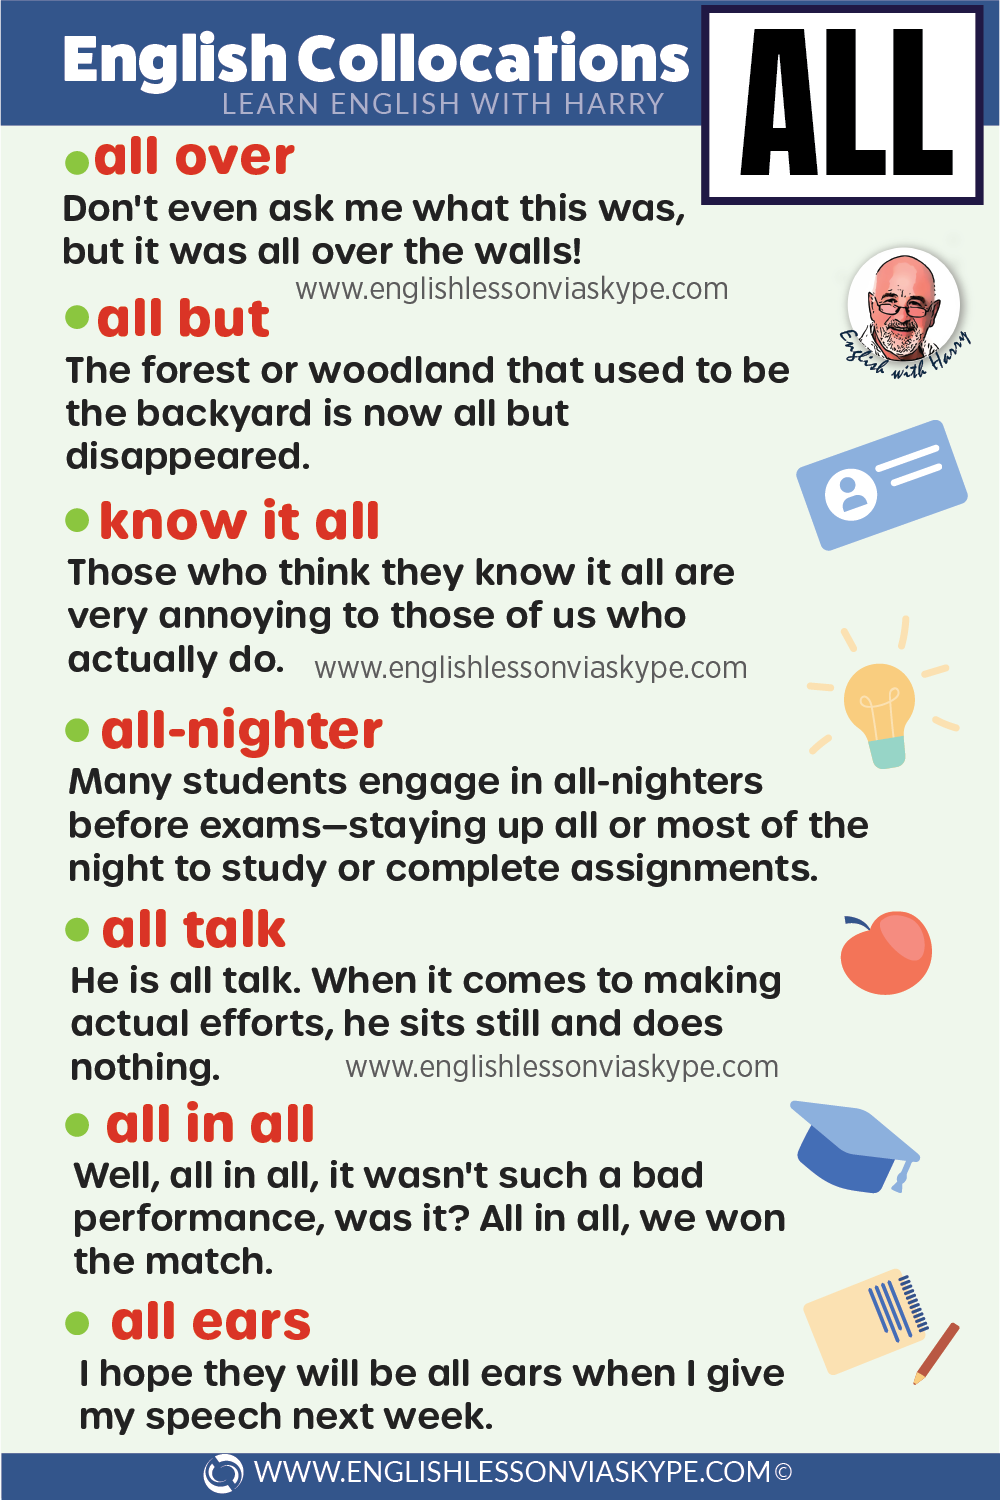 11 Collocations with ALL. Advanced English learning. Online English lessons on Zoom and Skype. Study advanced English at www.englishlessonviaskype.com #learnenglish